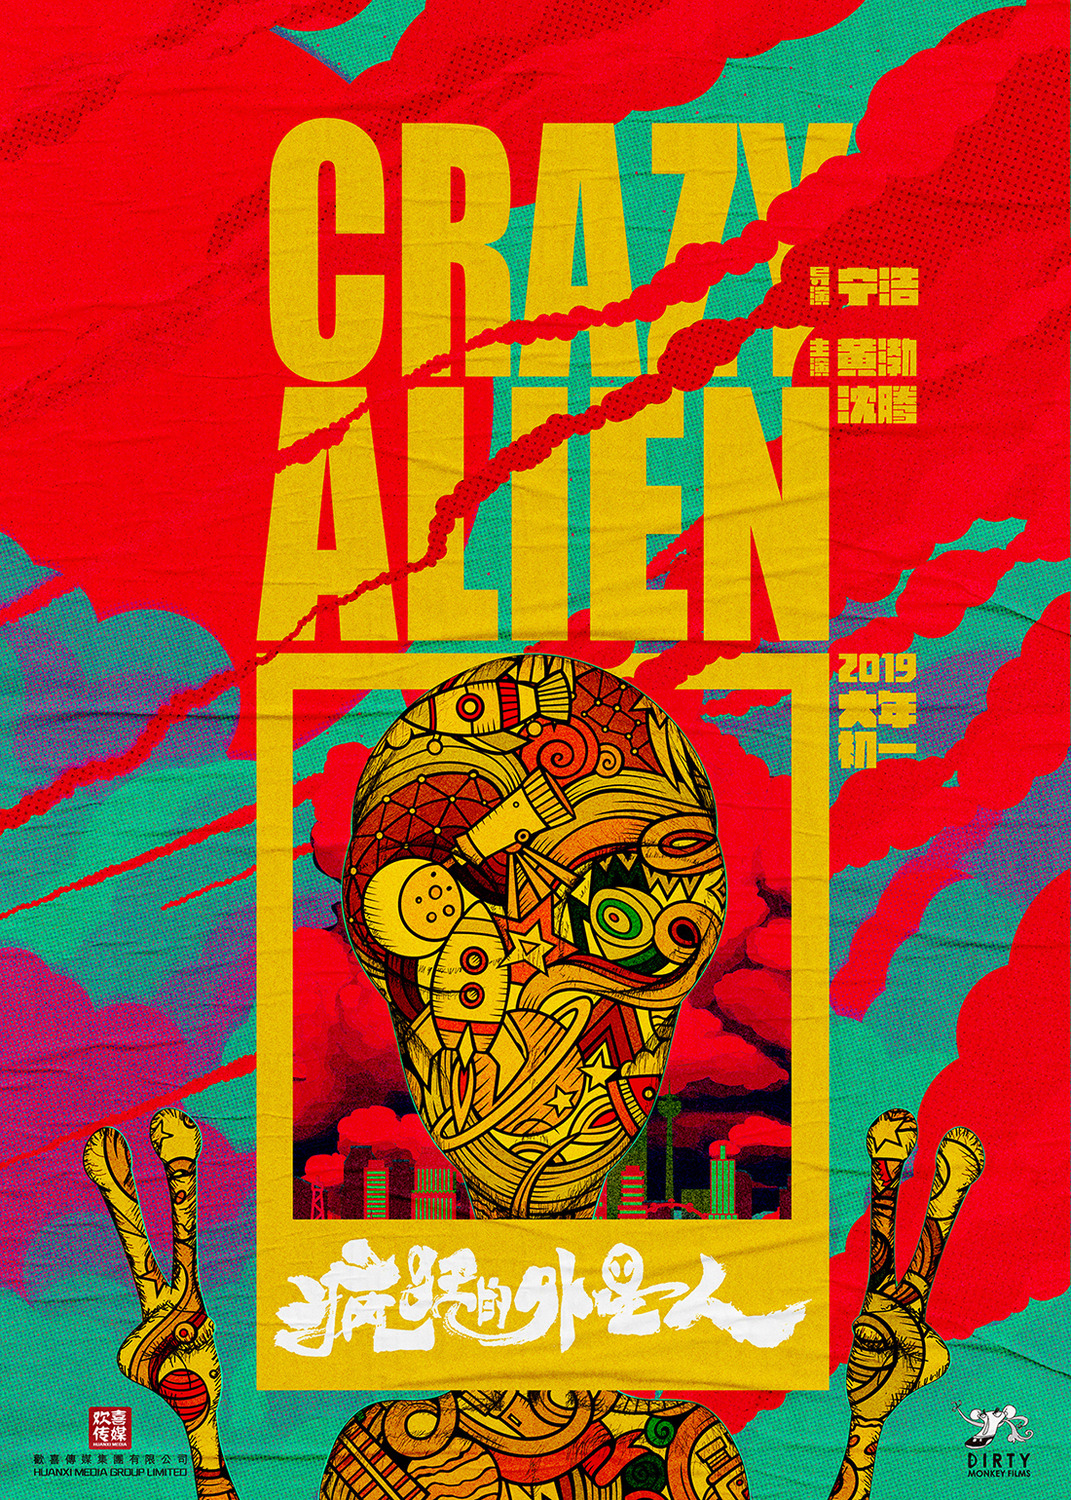 Extra Large Movie Poster Image for Crazy Alien (#2 of 2)